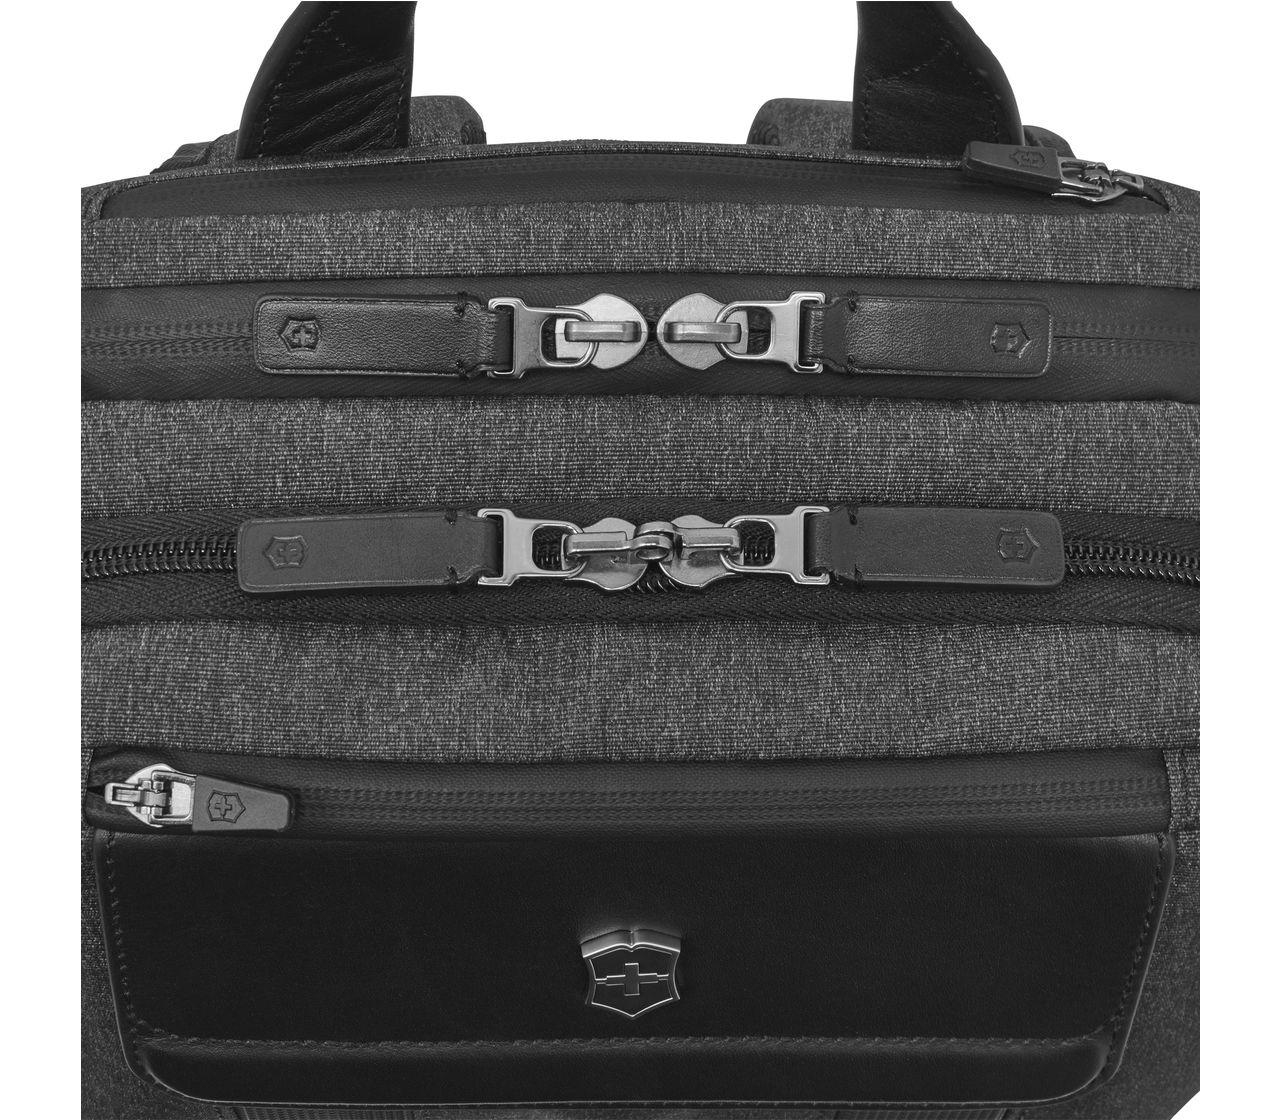 Architecture Urban2 Deluxe Backpack-611954